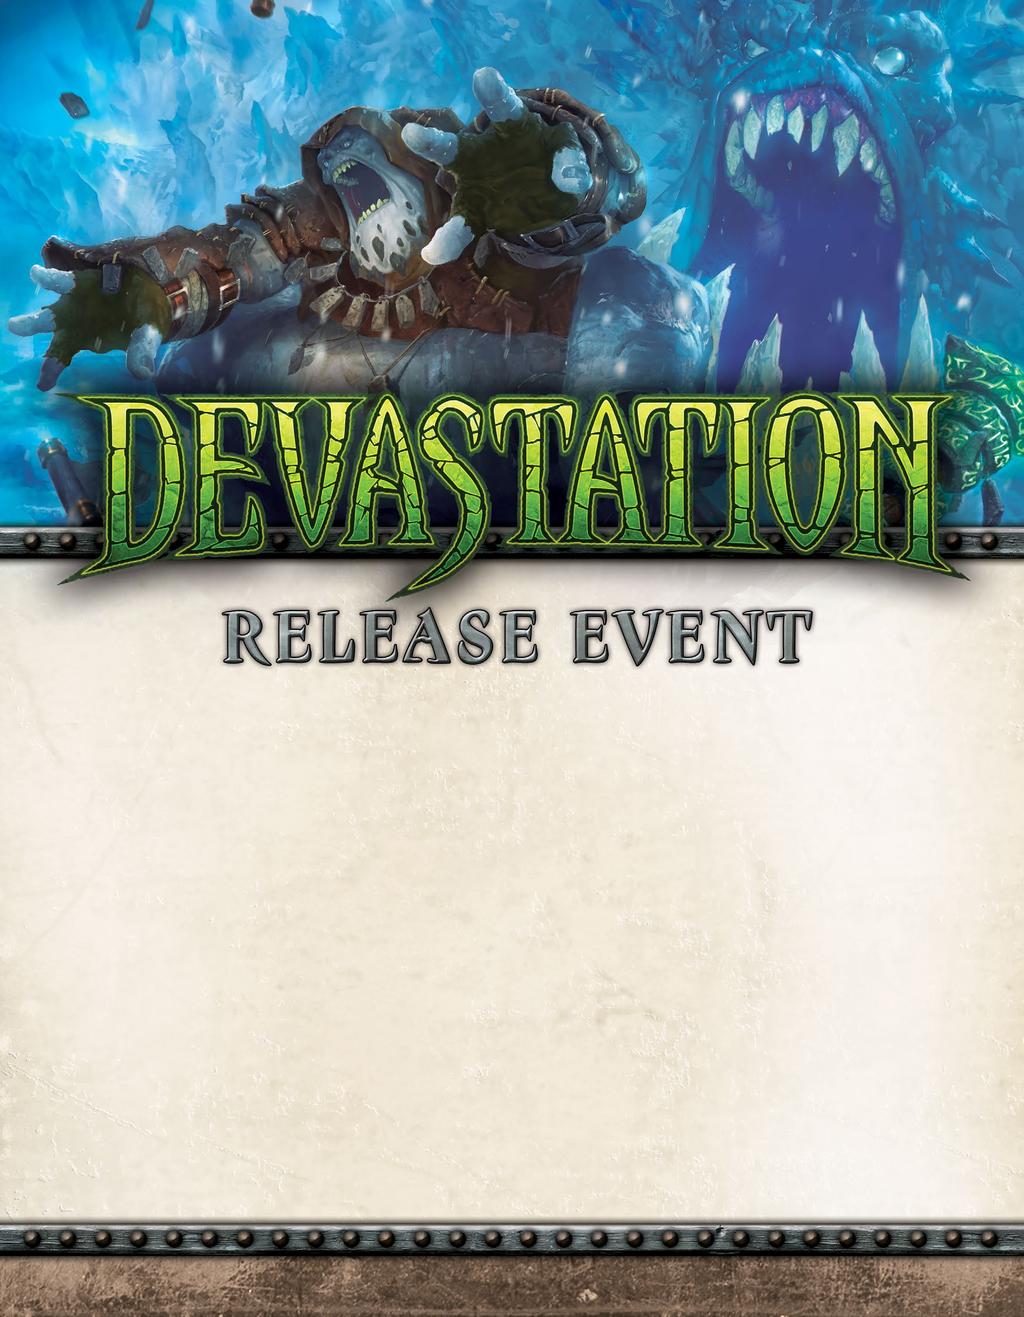 This is a HORDES-only event that features the Trollblood, Circle Orboros, Skorne, Legion of Everblight, and Minion armies.